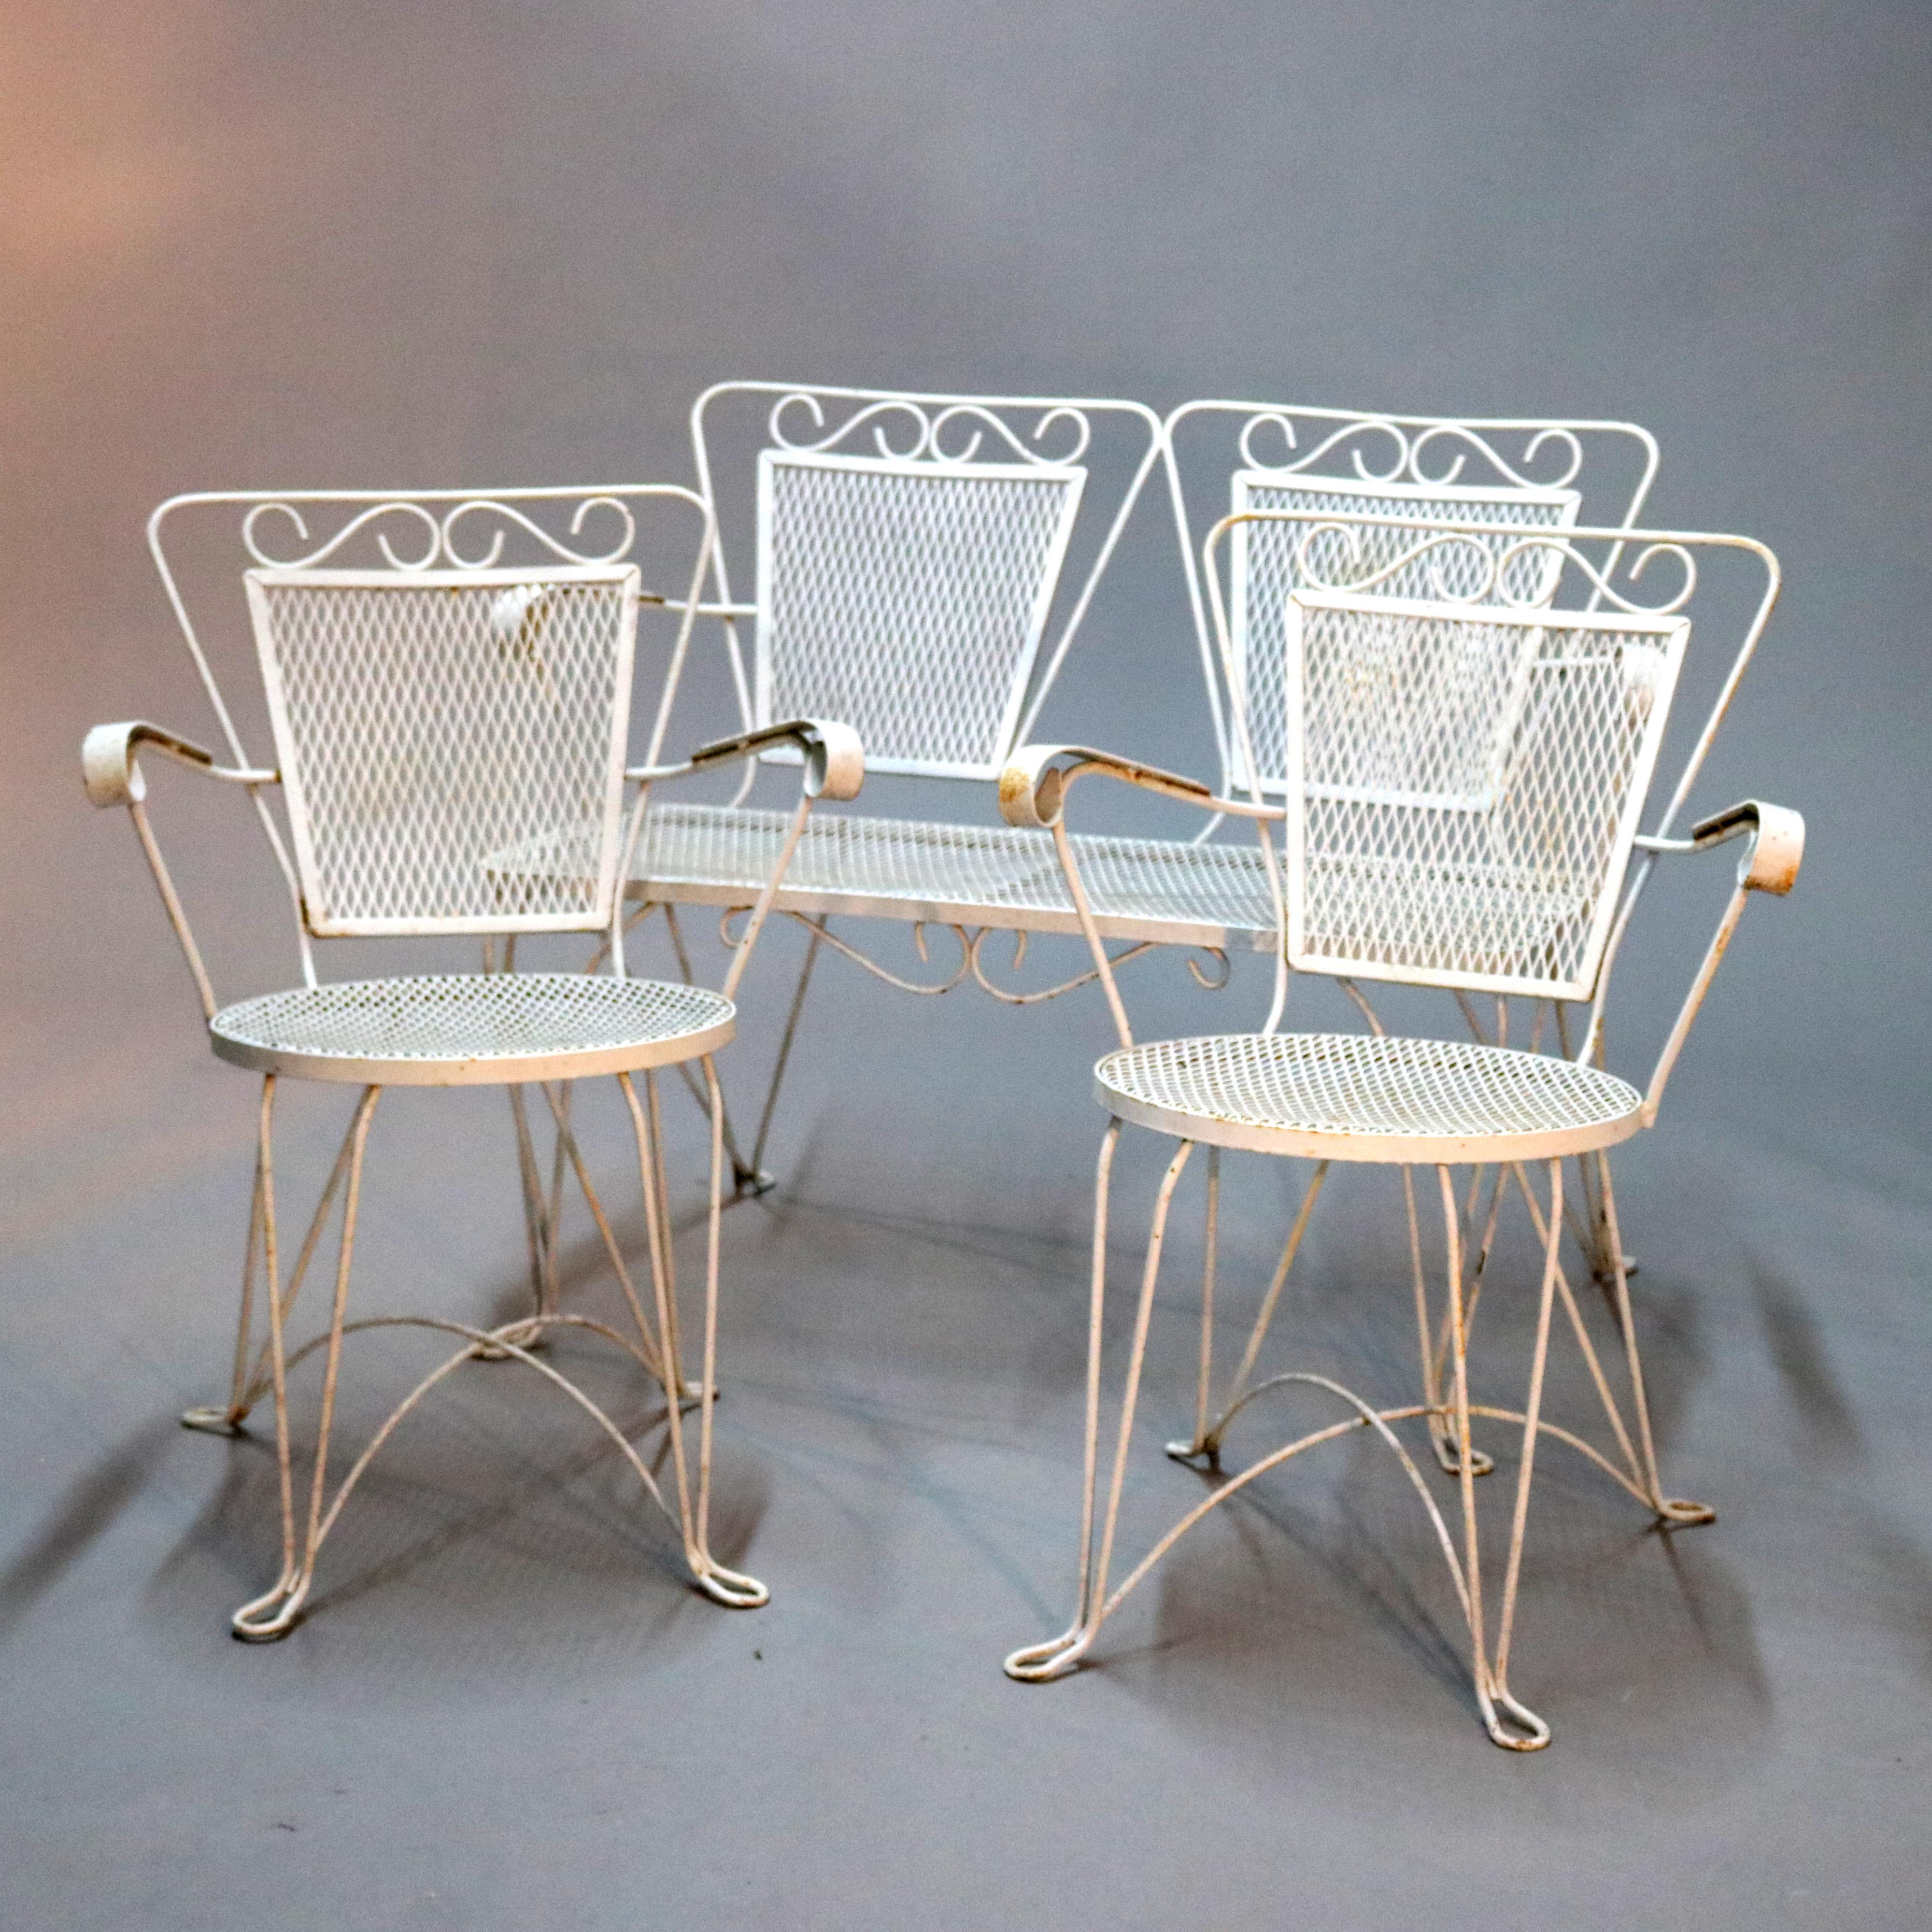 A Mid-Century Modern 4-piece garden patio set offers white painted metal construction having scroll arms, ice cream parlor wire legs with mesh seats and backs, includes a double bench (settee), two armchairs and a side table, circa